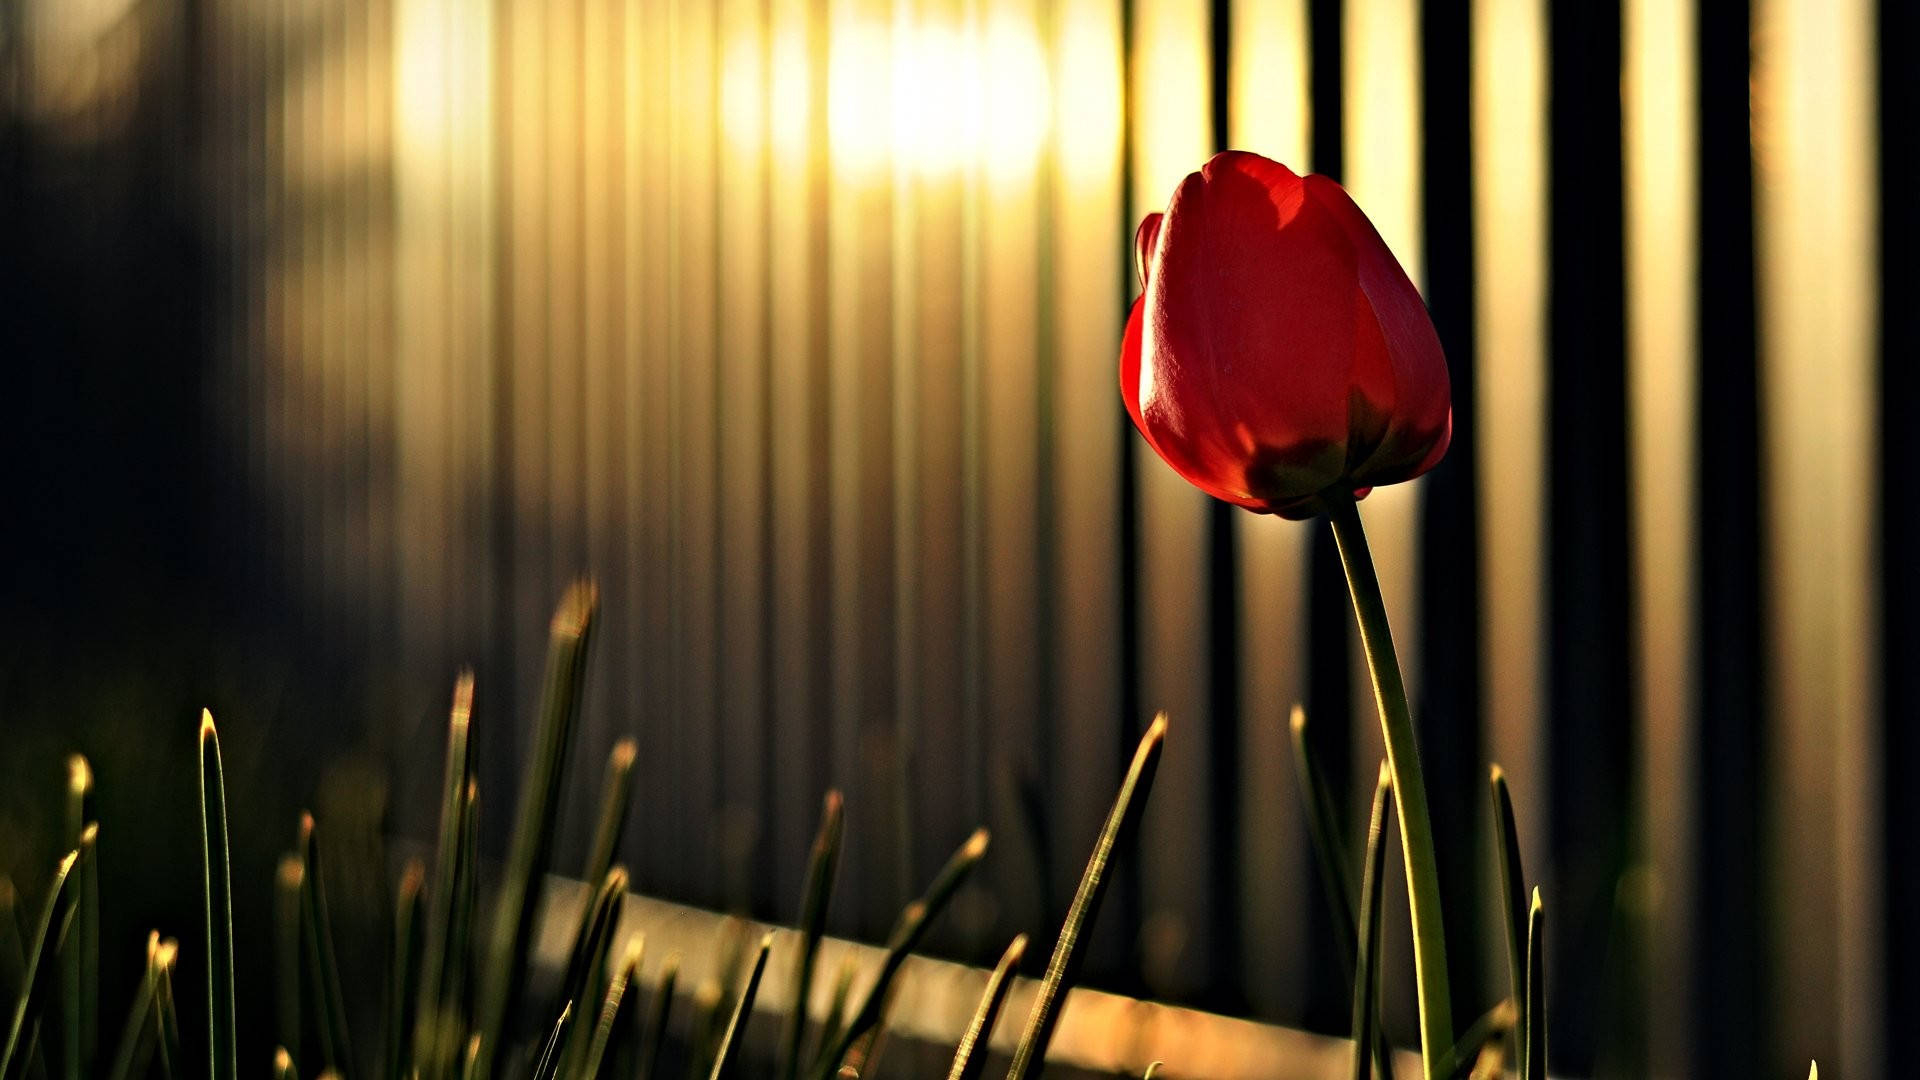 1920x1080 Download Spring Tulips Photography Wallpaper